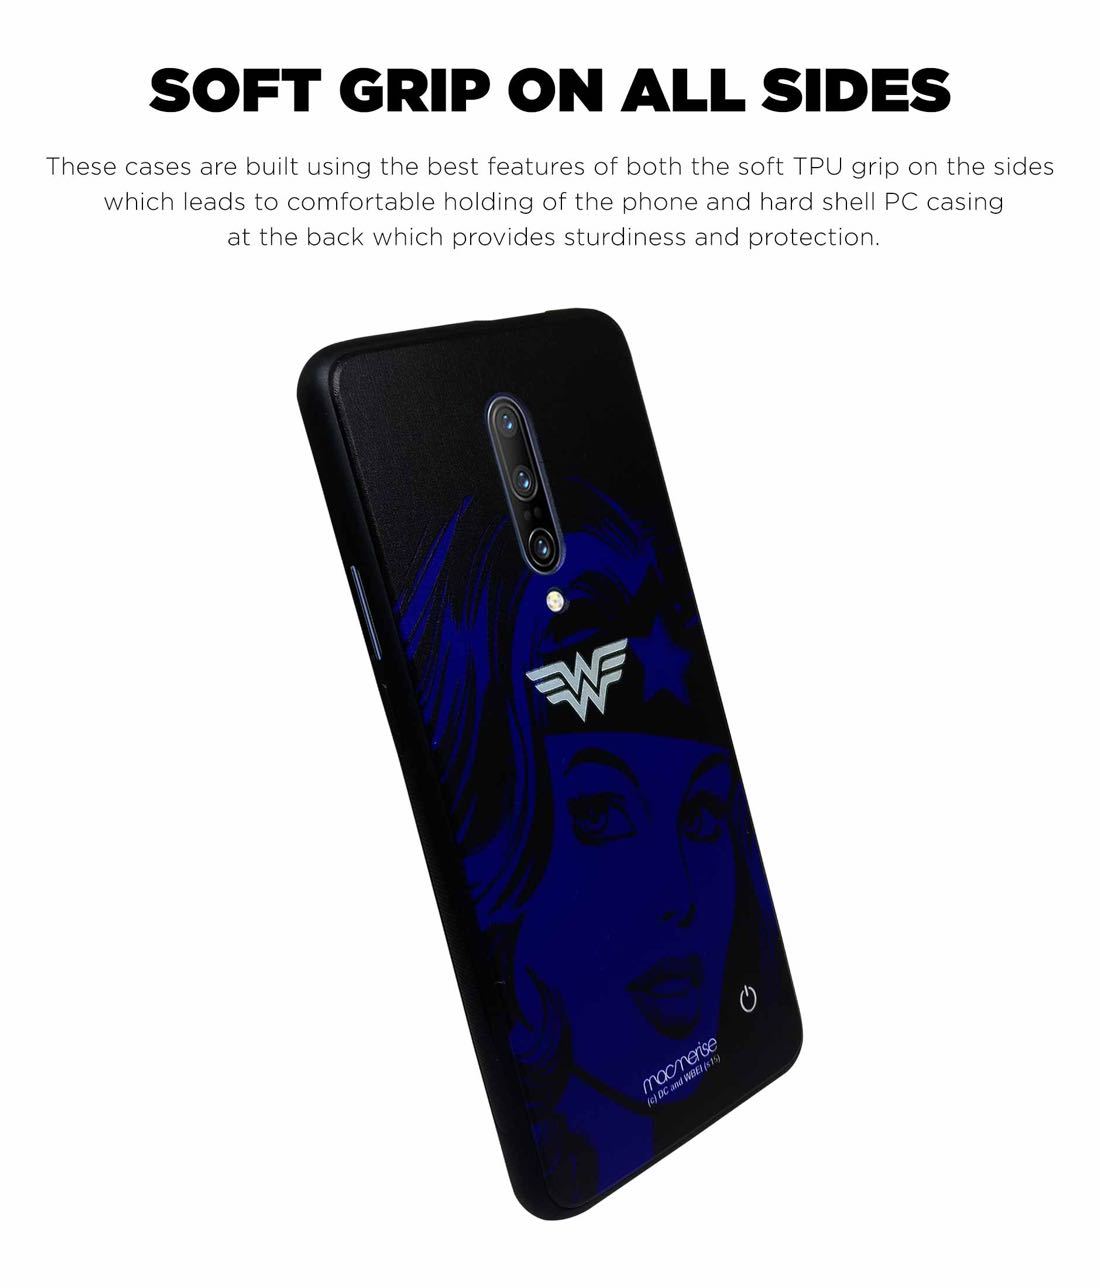 Silhouette Wonder Woman - Lumous LED Phone Case for OnePlus 7 Pro